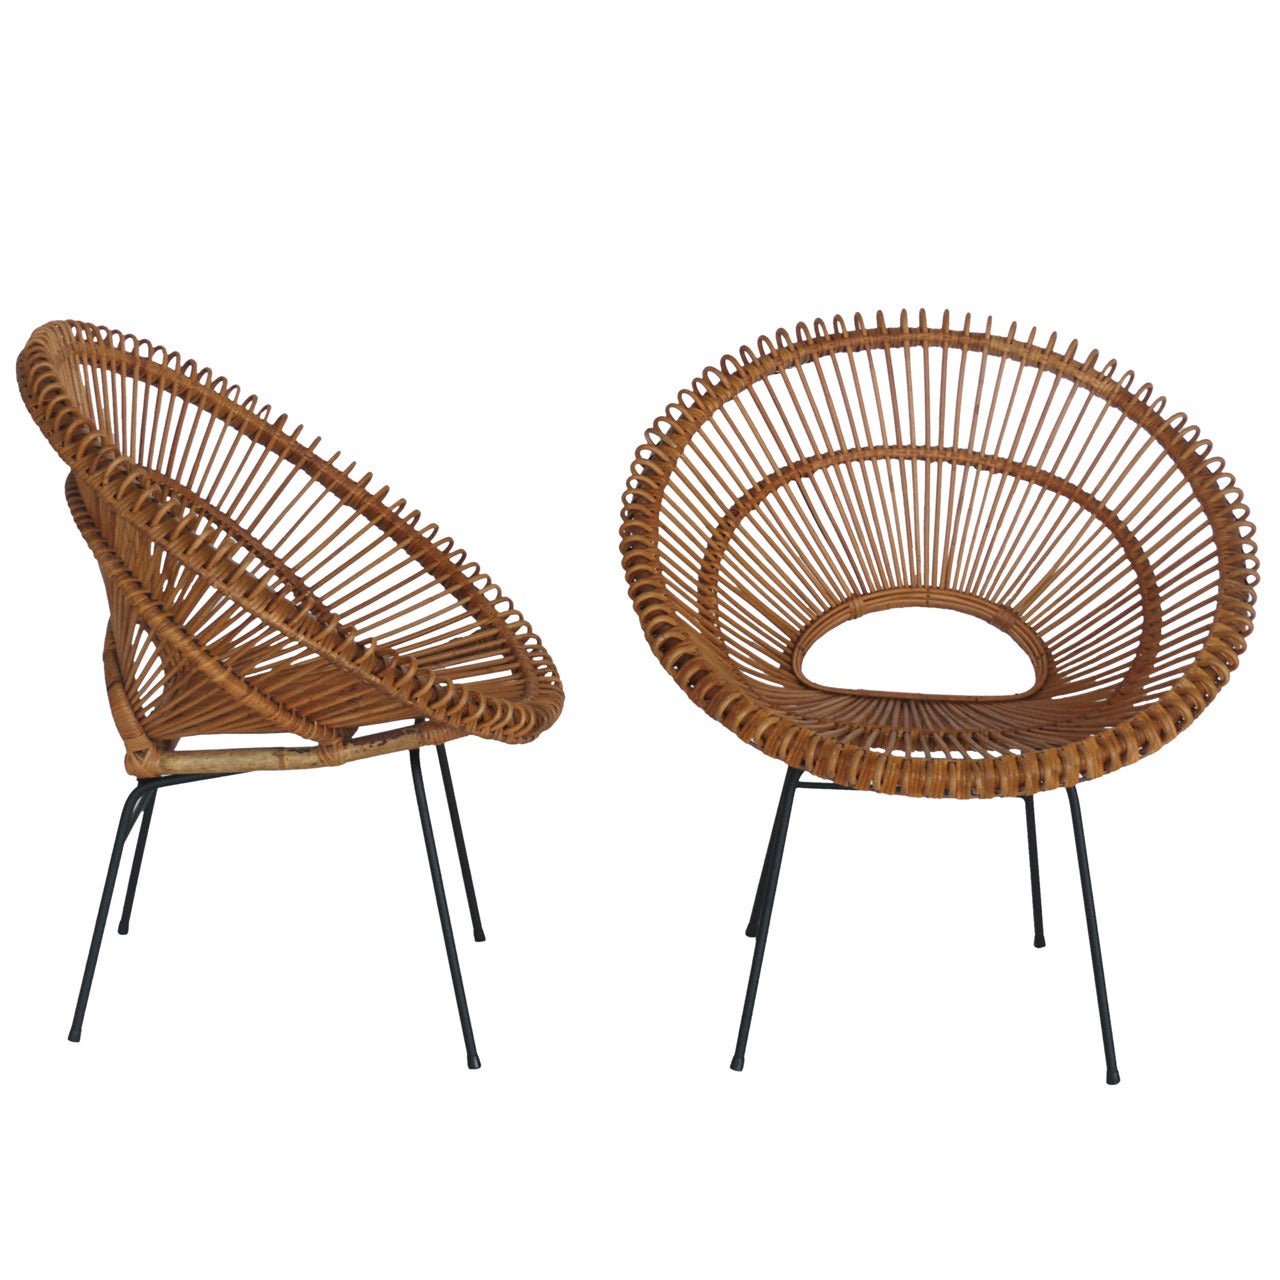 Rattan Bucket Chairs in the style of Franco Albini